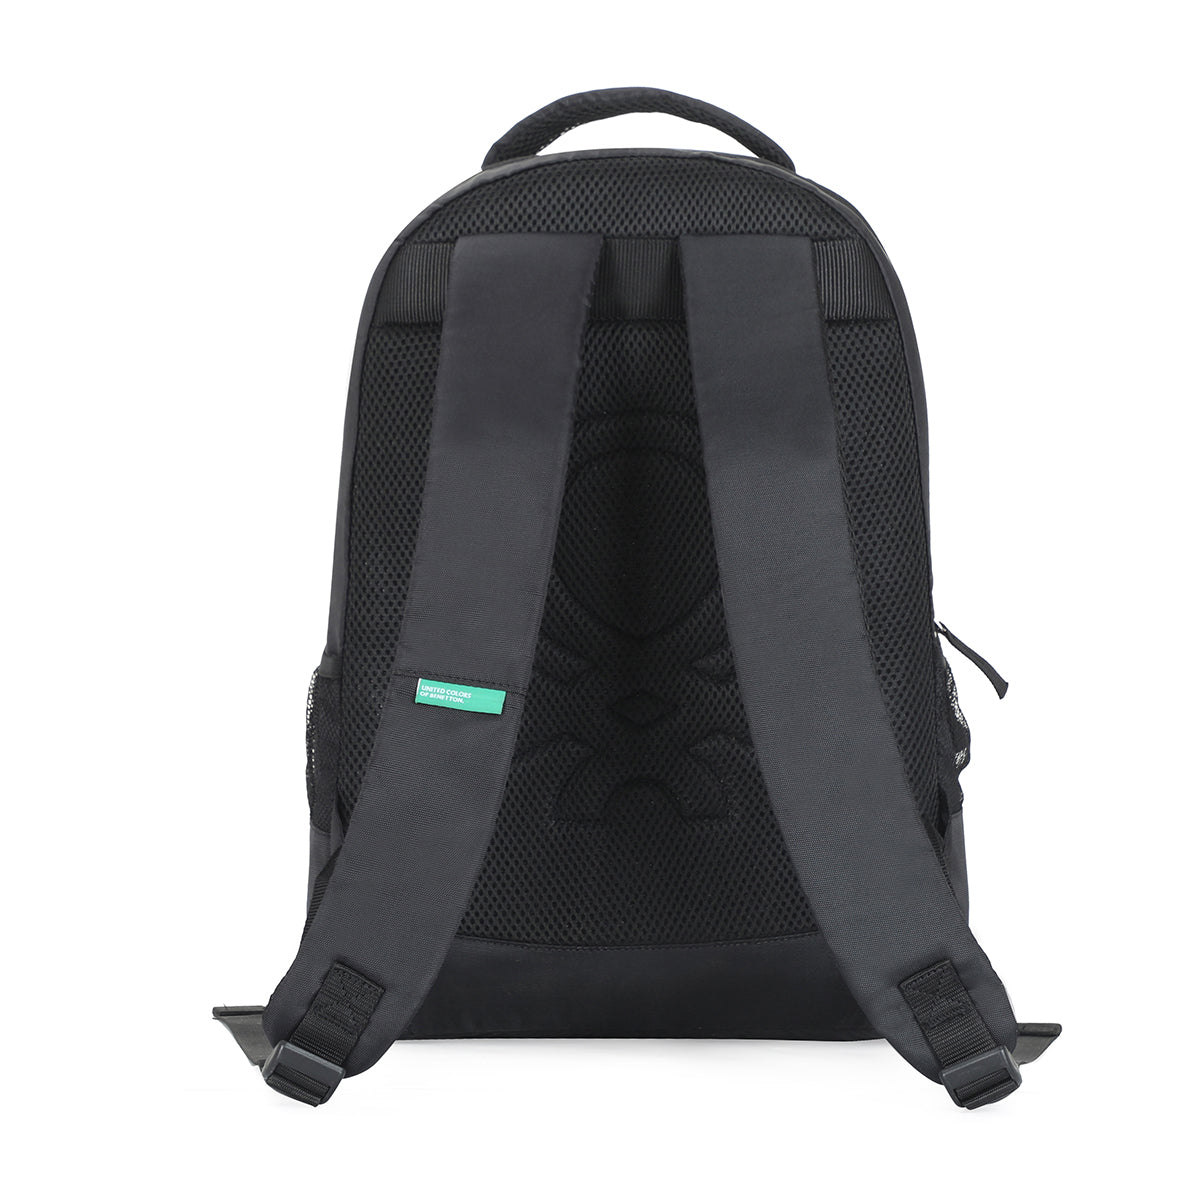 United Colors of Benetton Sable Laptop Backpack Non Laptop Backpack Black